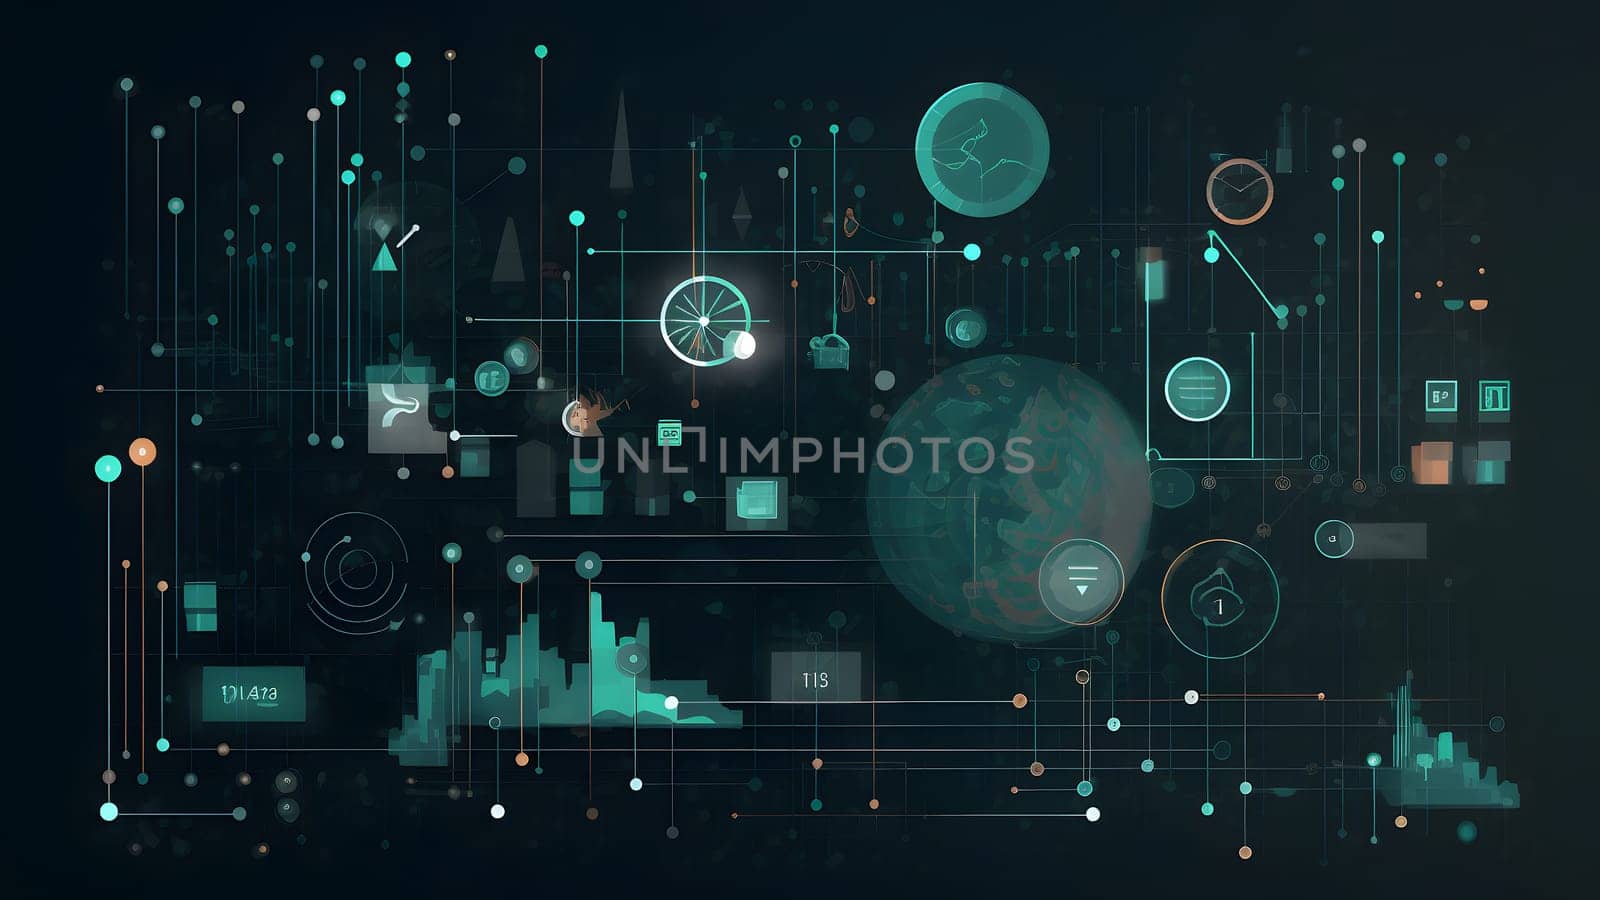 data science-inspired wallpaper depicting the visual and modern process of data collection, cleaning, analysis, and visualization. Neural network generated in May 2023. Not based on any actual person, scene or pattern.